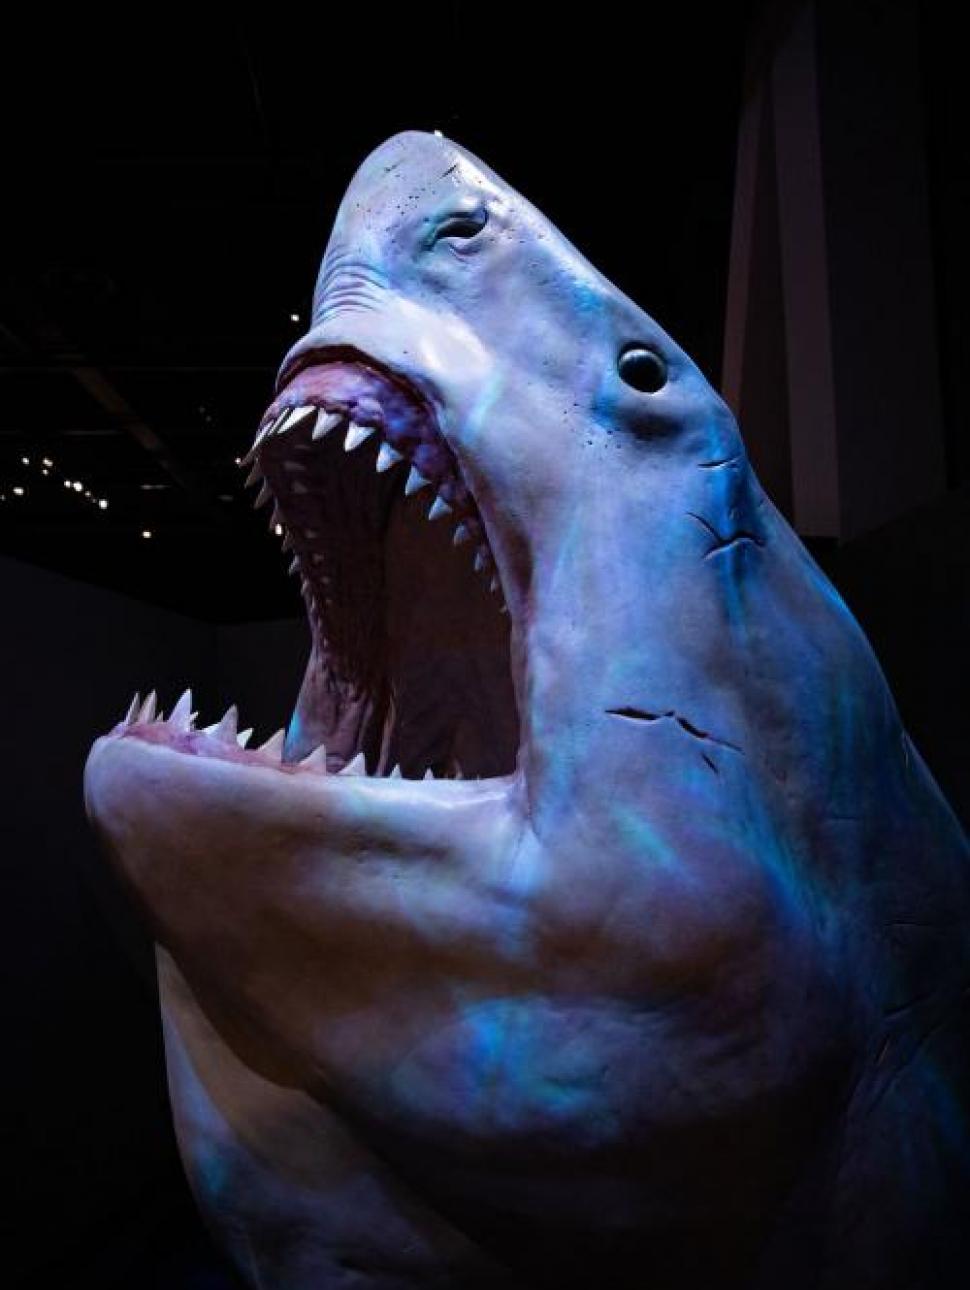 An image showing the life sized head of the ancient shark meglodaon 